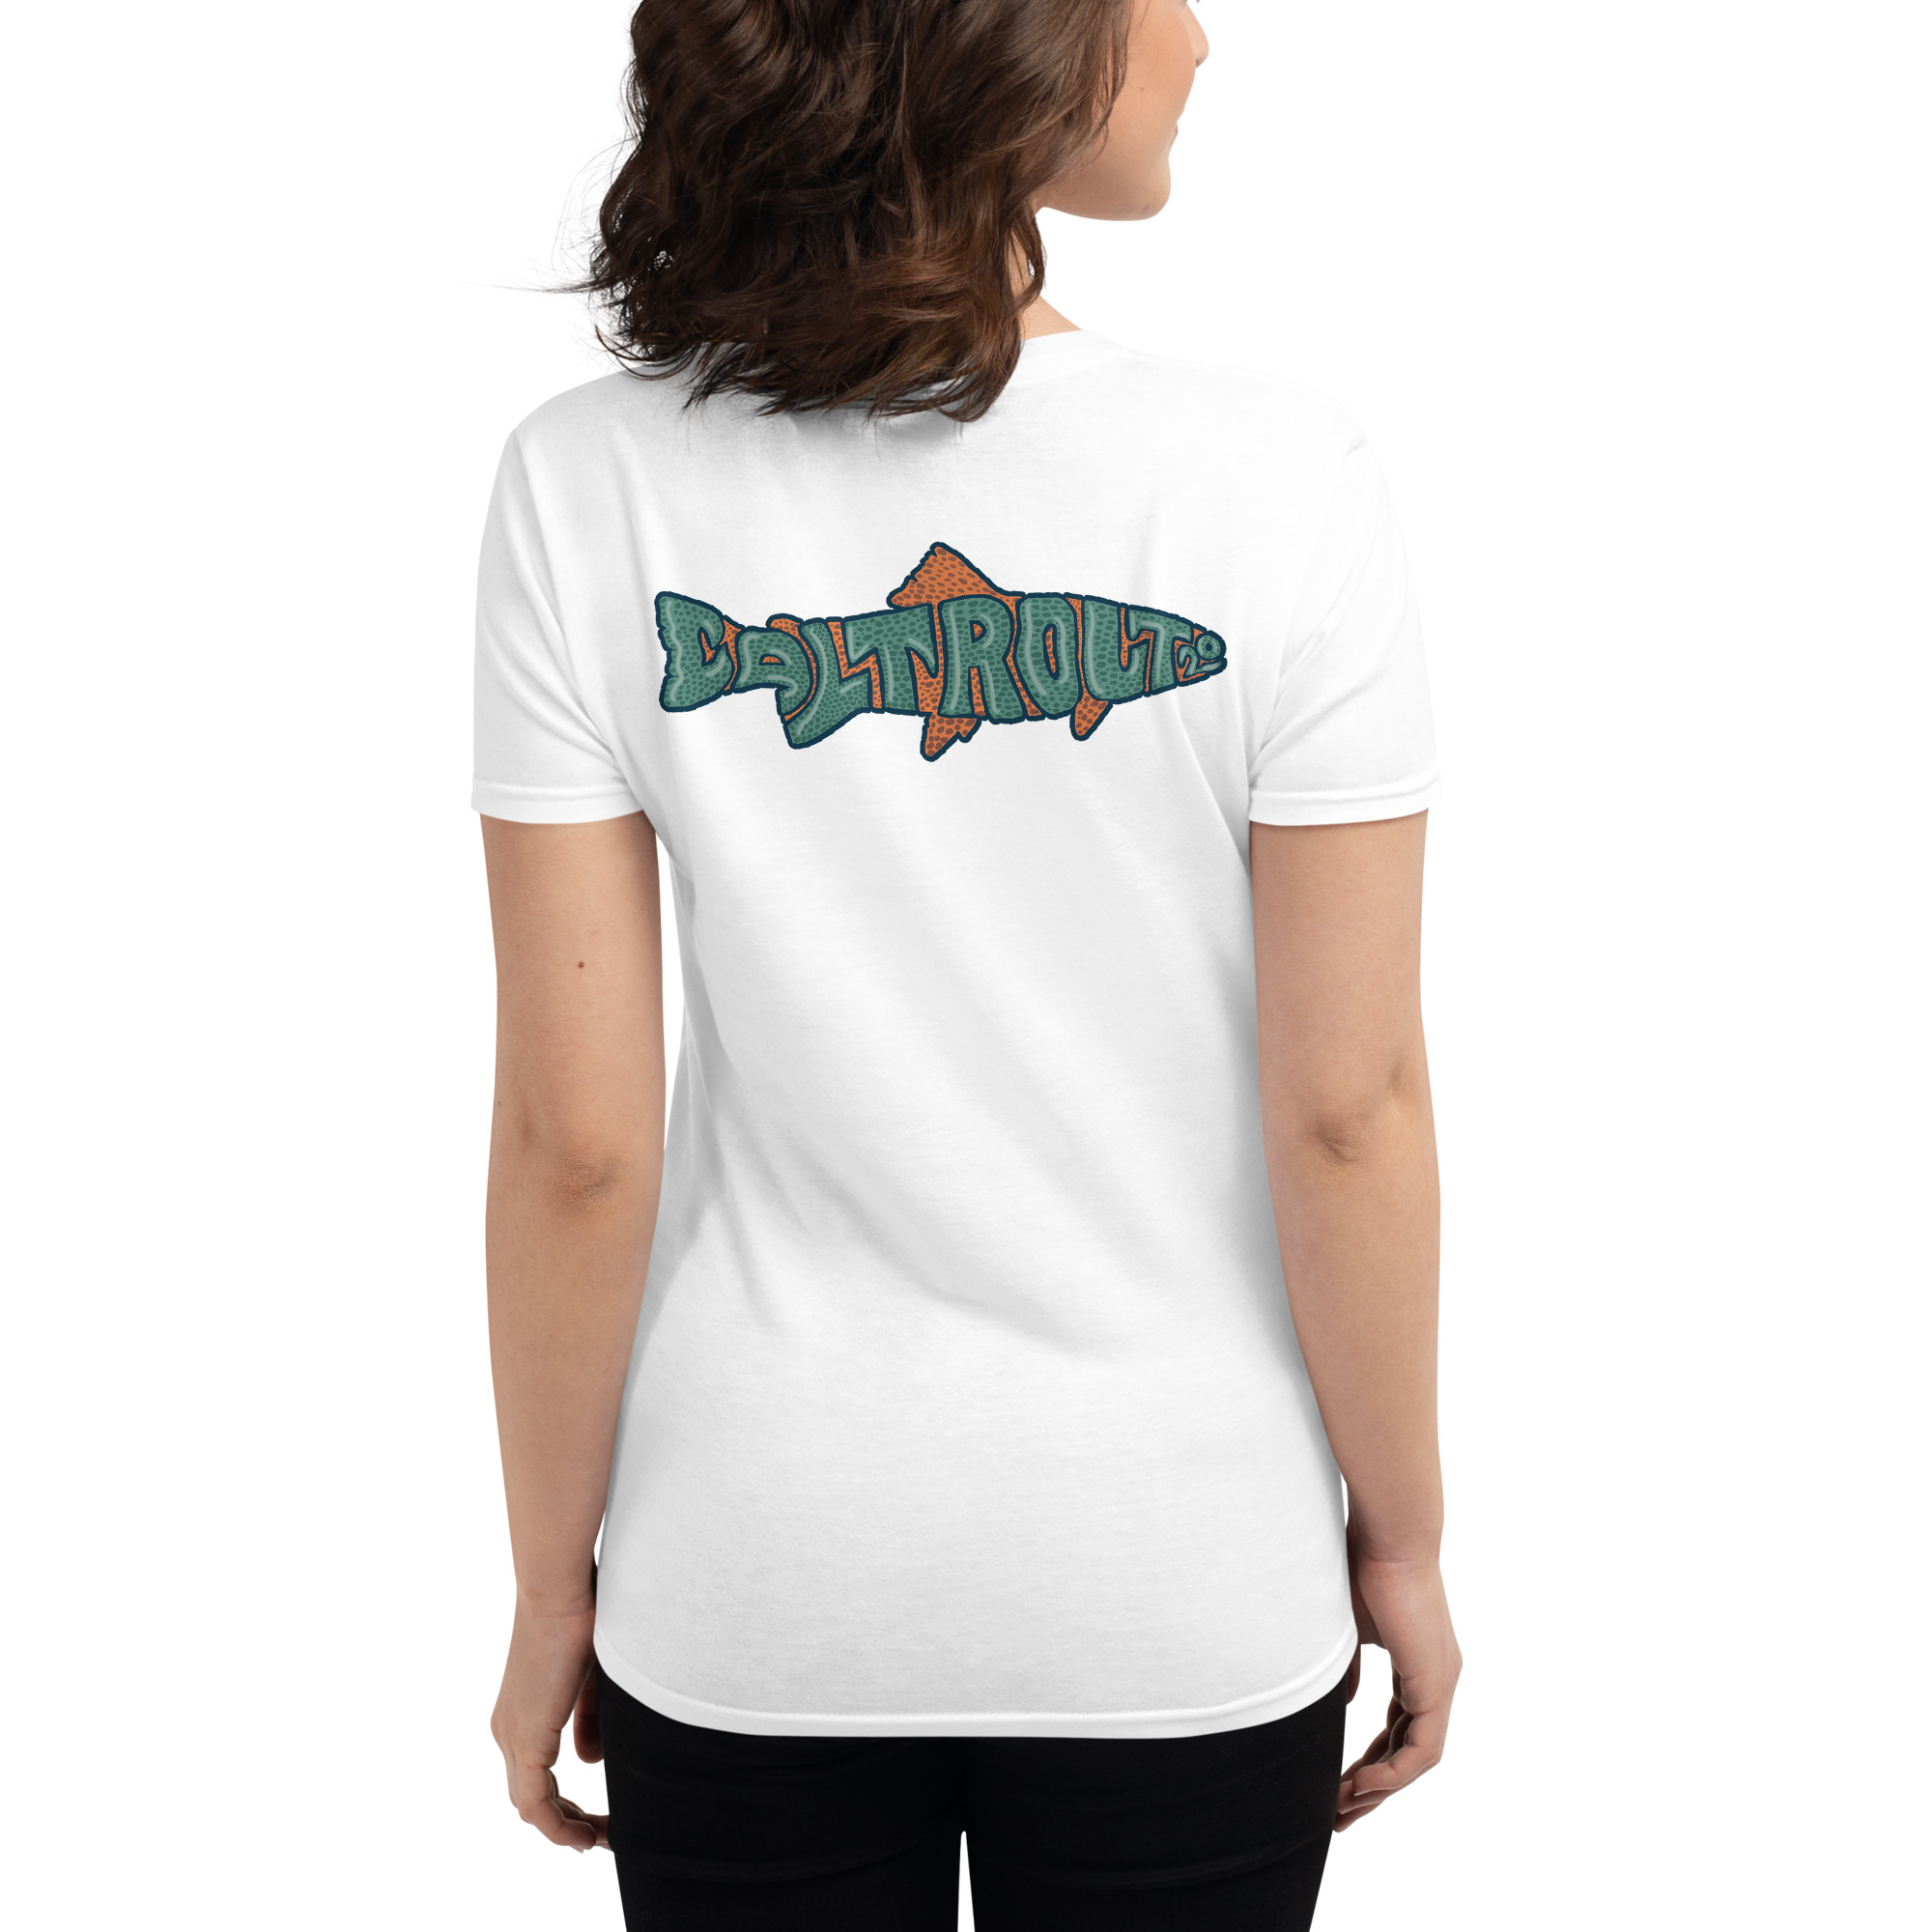 id rather be at work than fishing right now fish' Women's Plus Size  T-Shirt | Spreadshirt